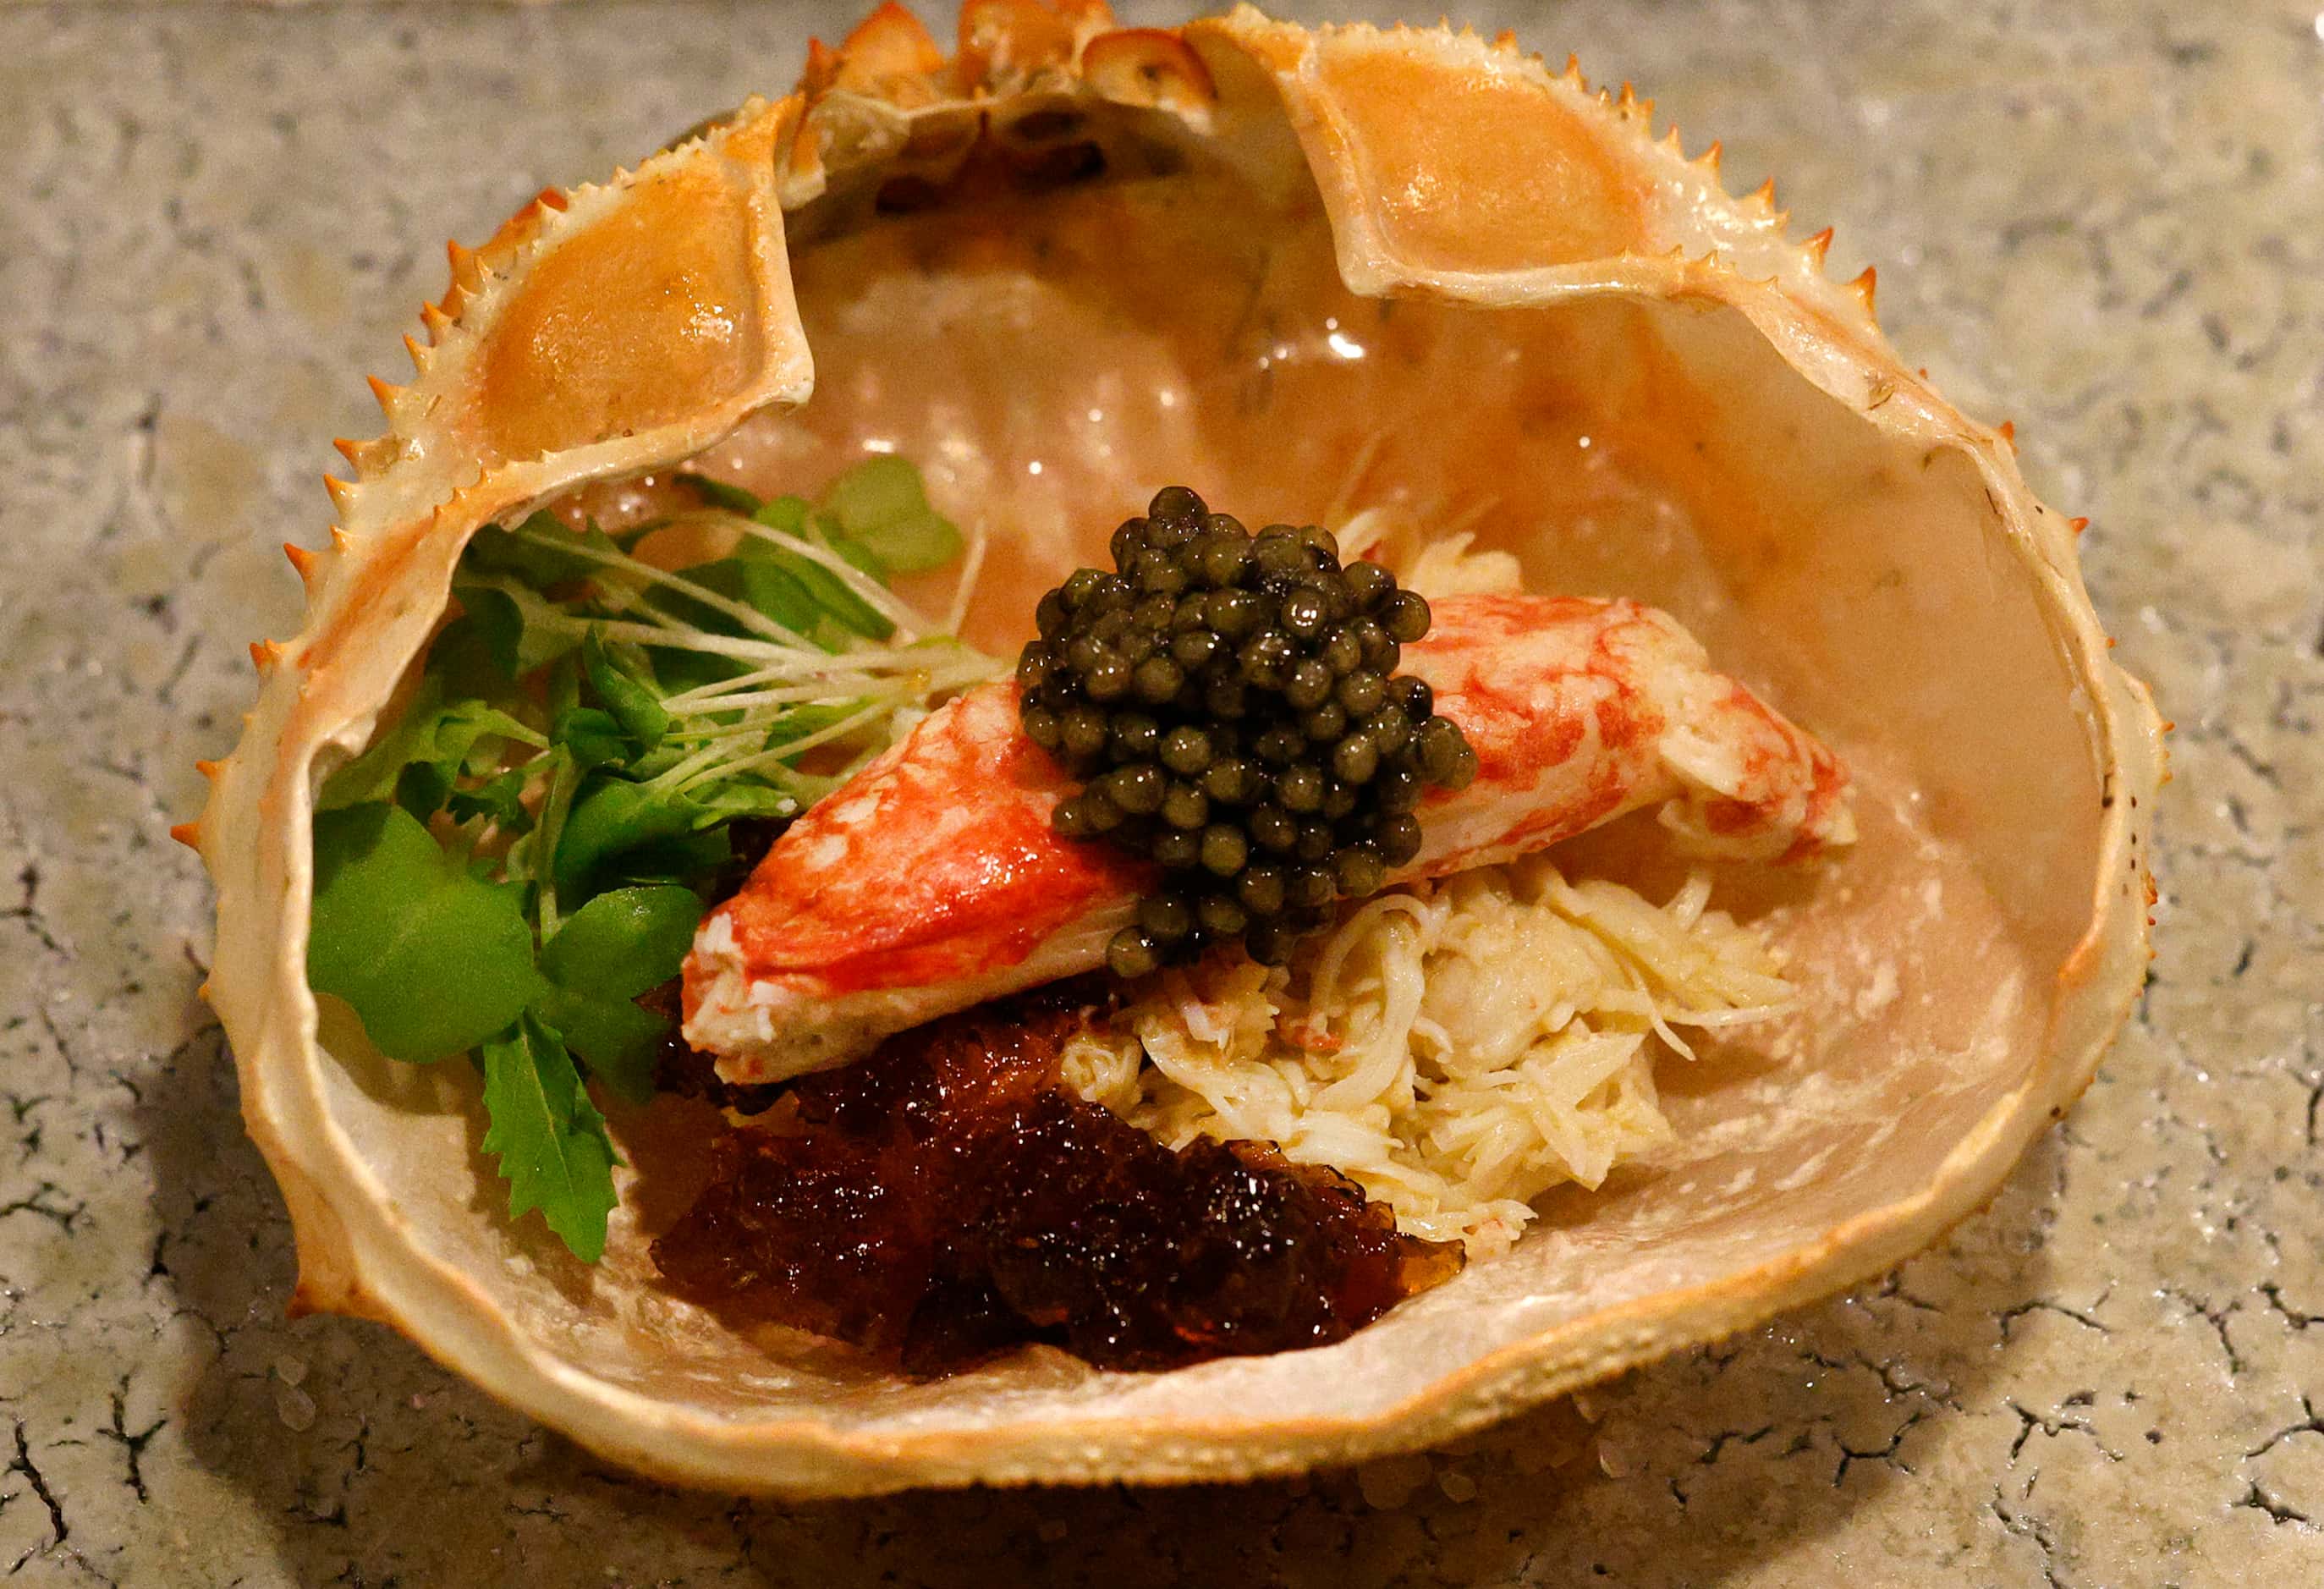 A kegani (Japanese hairy crab) dish was the third course at a recent tasting at Chef...